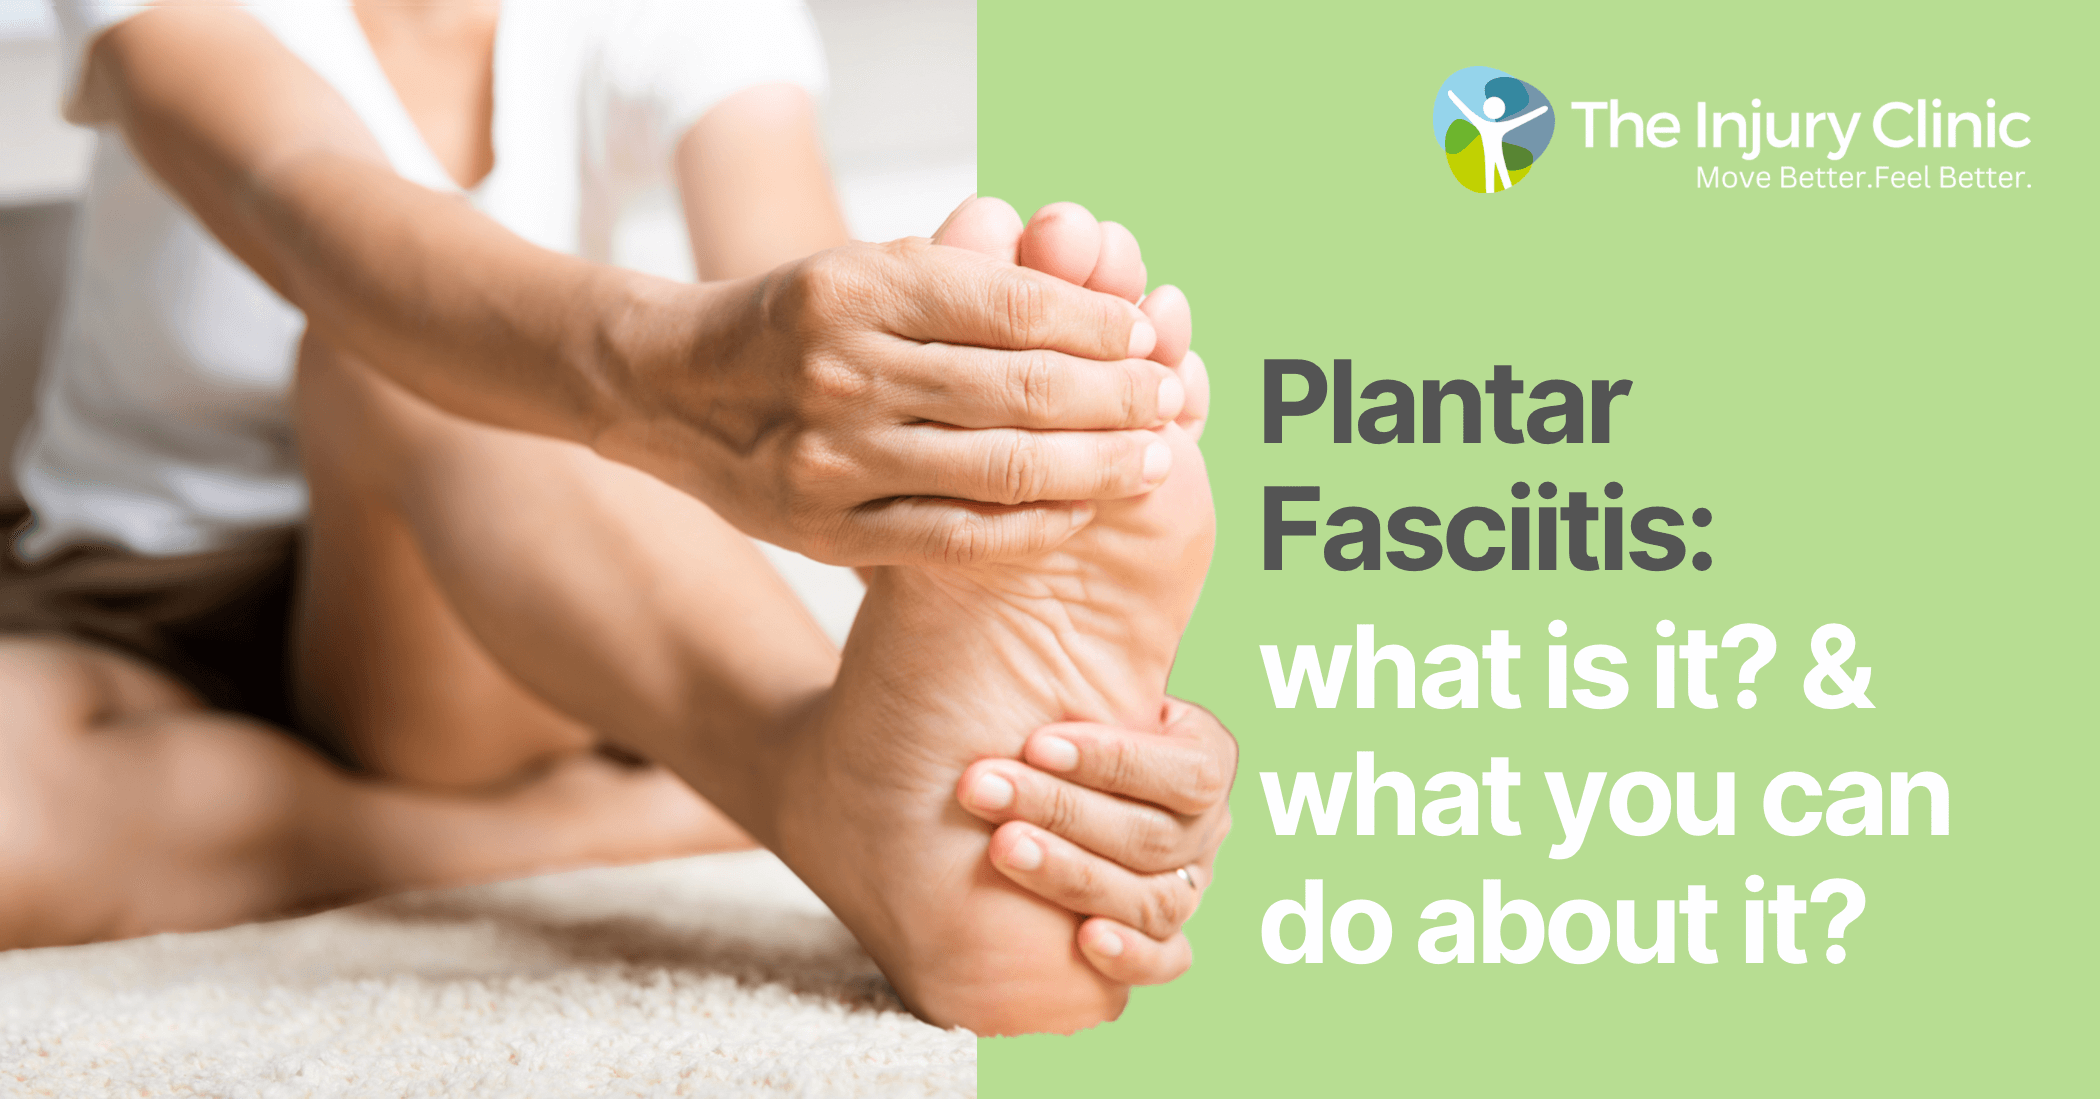 Plantar fasciitis: How is it treated and who's at risk?